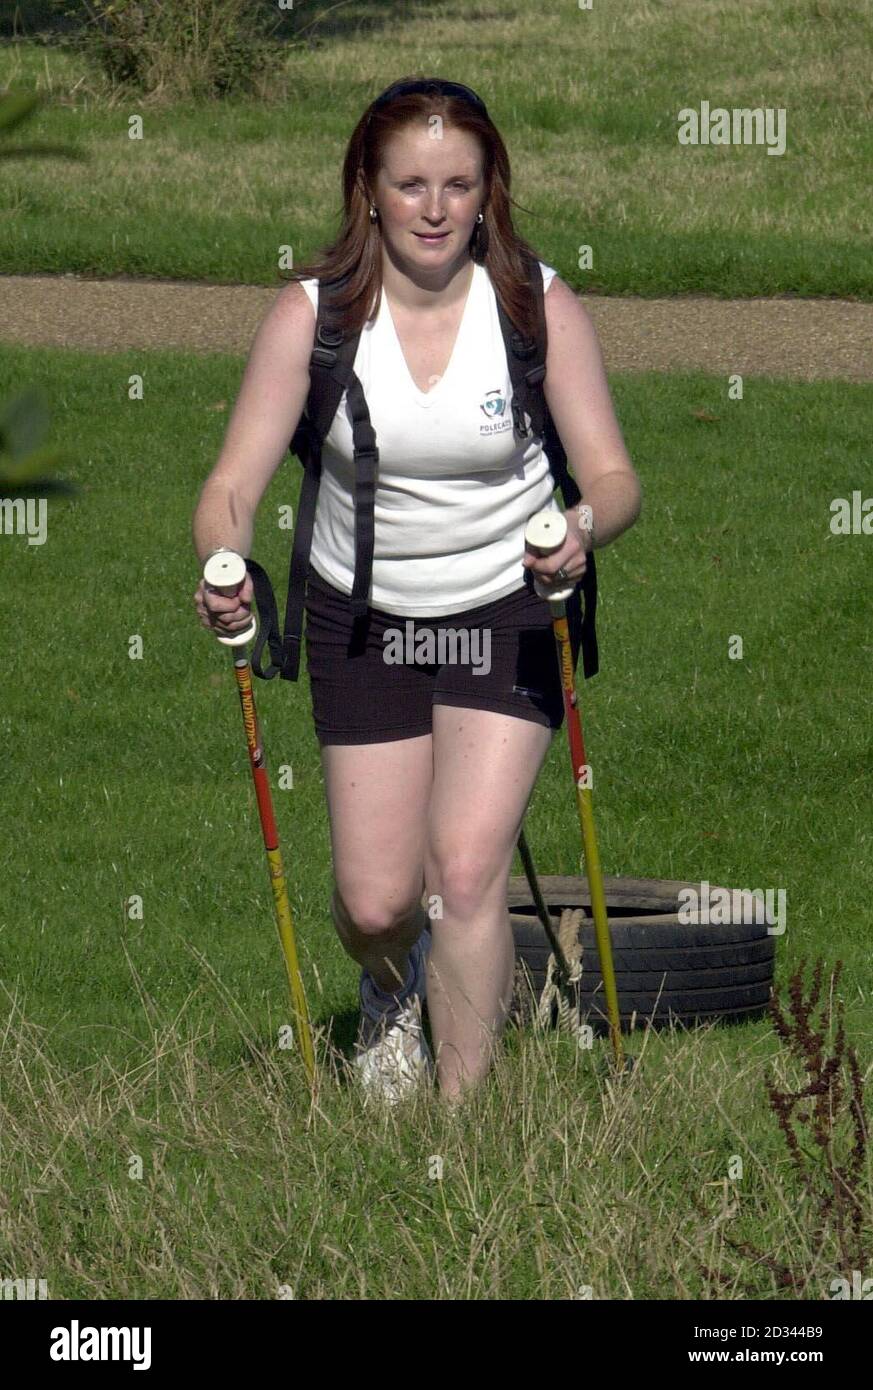 Tori James, aged 22, from Pembrokeshire, trains in a London park, in preparation for an attempt to be part of the first all-woman team to complete the Polar Challenge. The 'Polecats', Tori, Felicity Aston and Sam Eve will be joining the gruelling 320-mile race from Polaris Mine in the Canadian Nunavut Territory across constantly-shifting sea ice to the Magnetic Pole, in April 2005.  Stock Photo